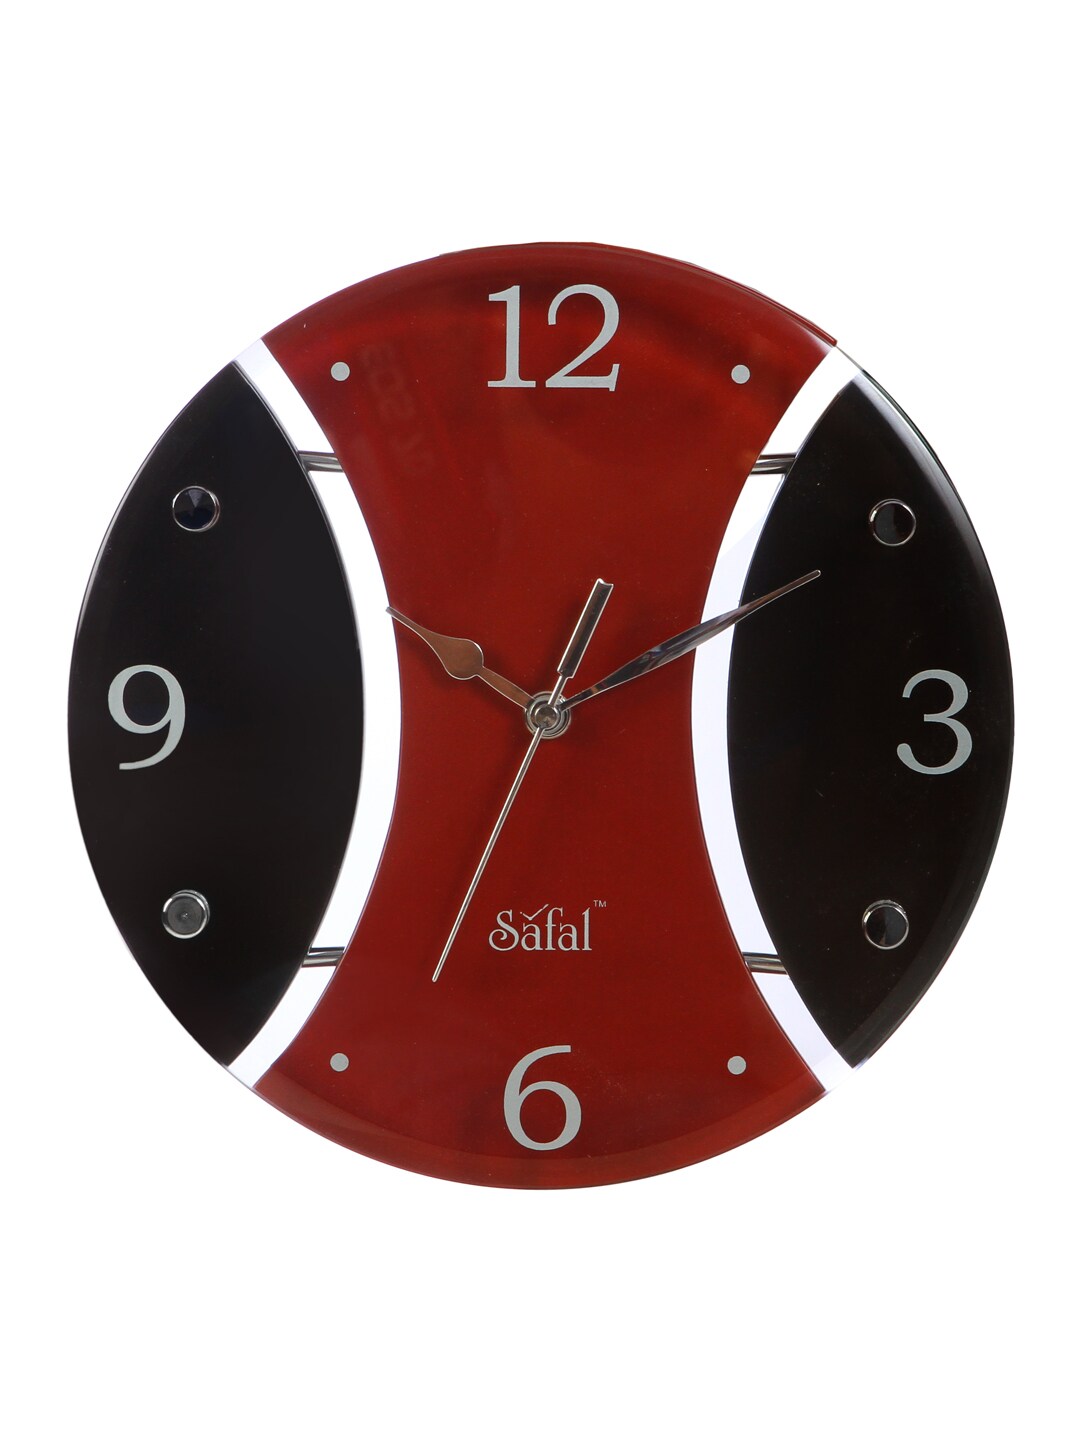 Safal Red & Black Colourblocked Dial Round 23 cm Analogue Wall Clock Price in India